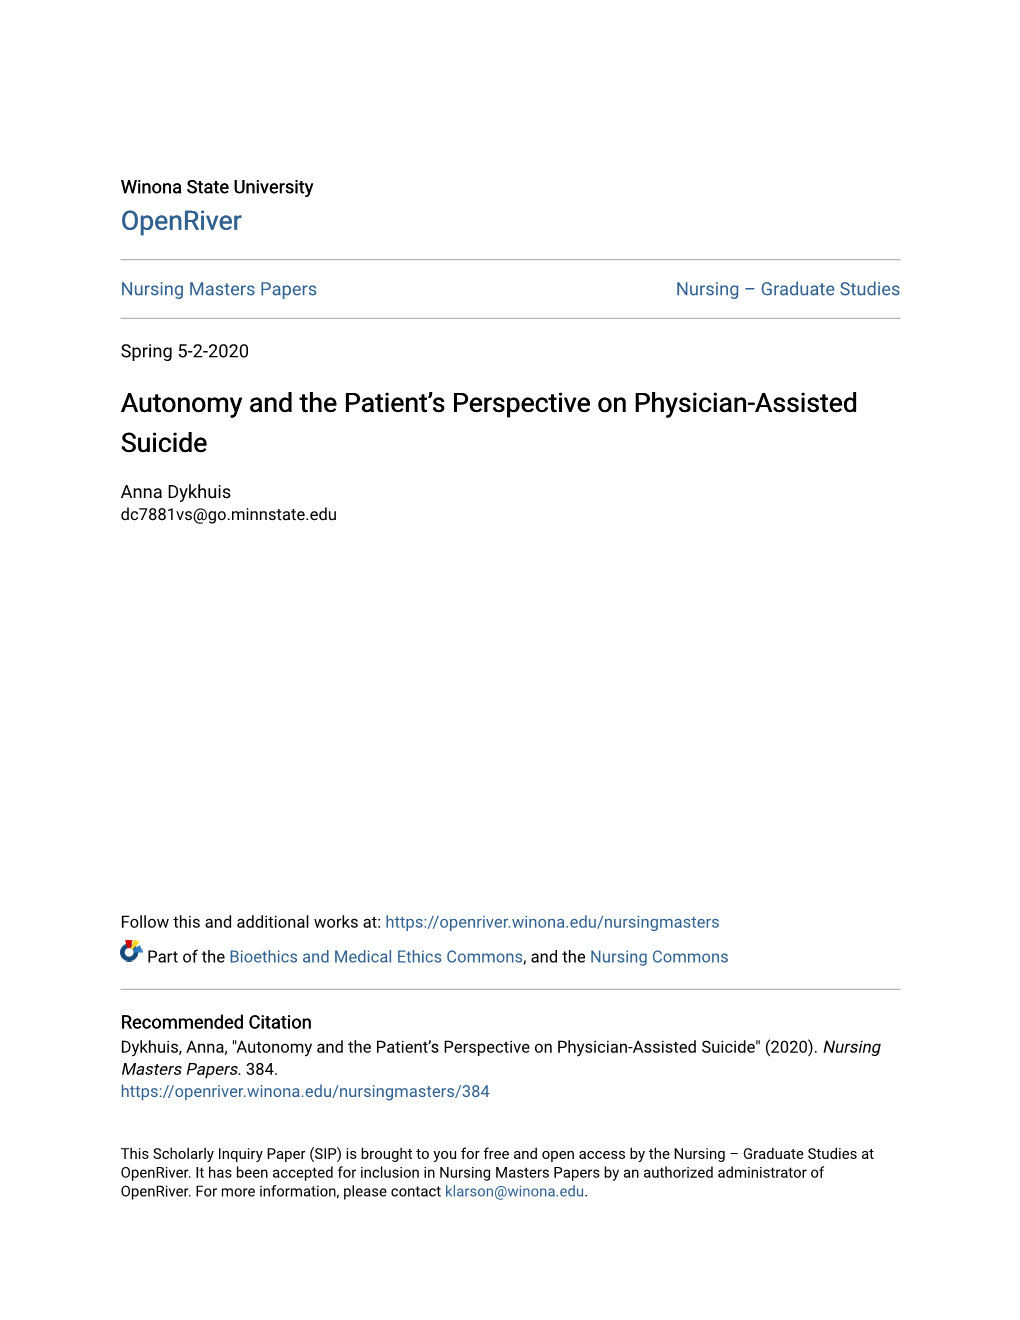 Autonomy and the Patient's Perspective on Physician-Assisted